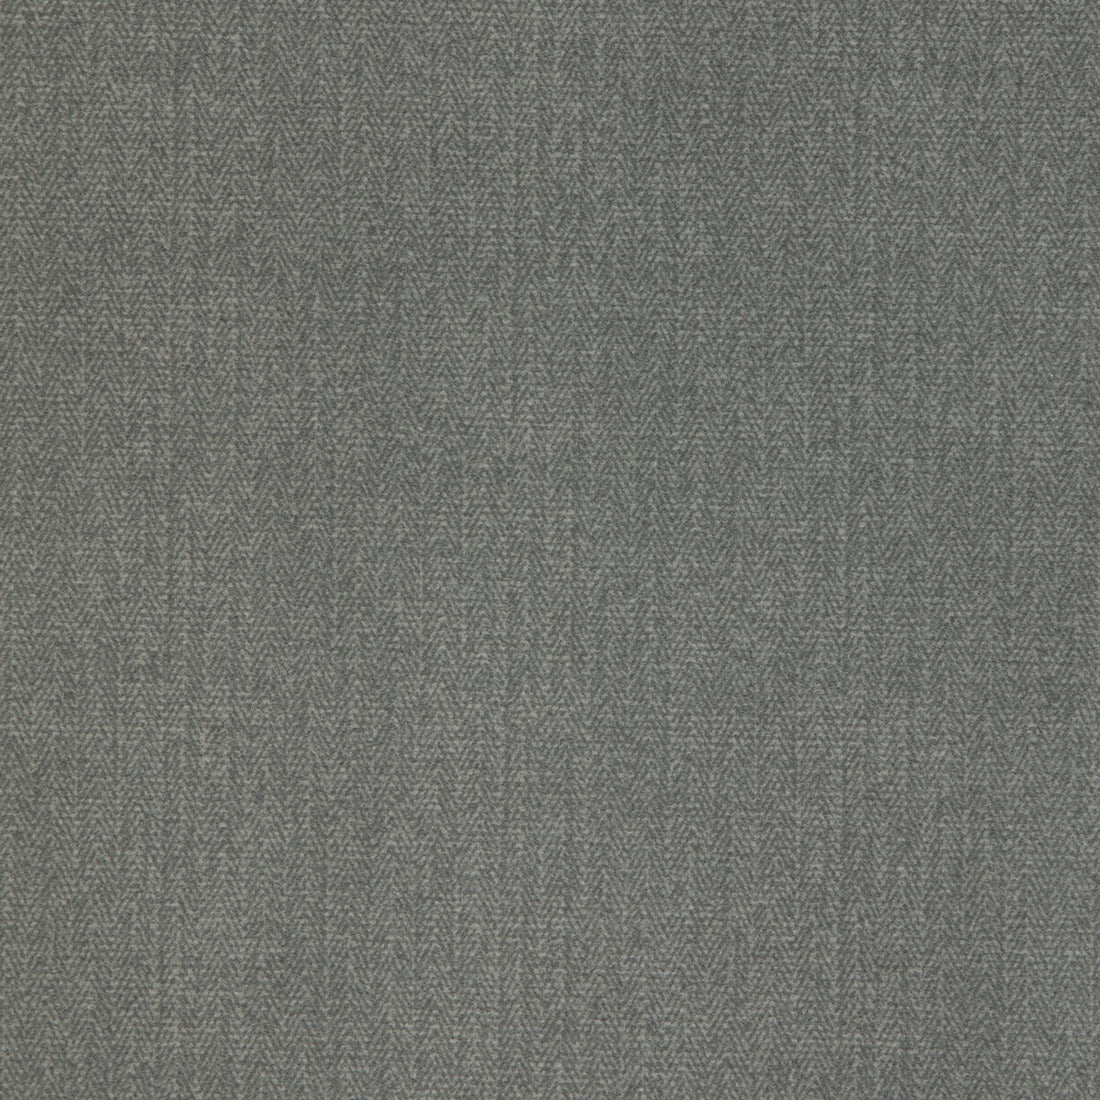 Kravet Design fabric in twill-581072 color - pattern TWILL.5810-72.0 - by Kravet Design in the Performance collection